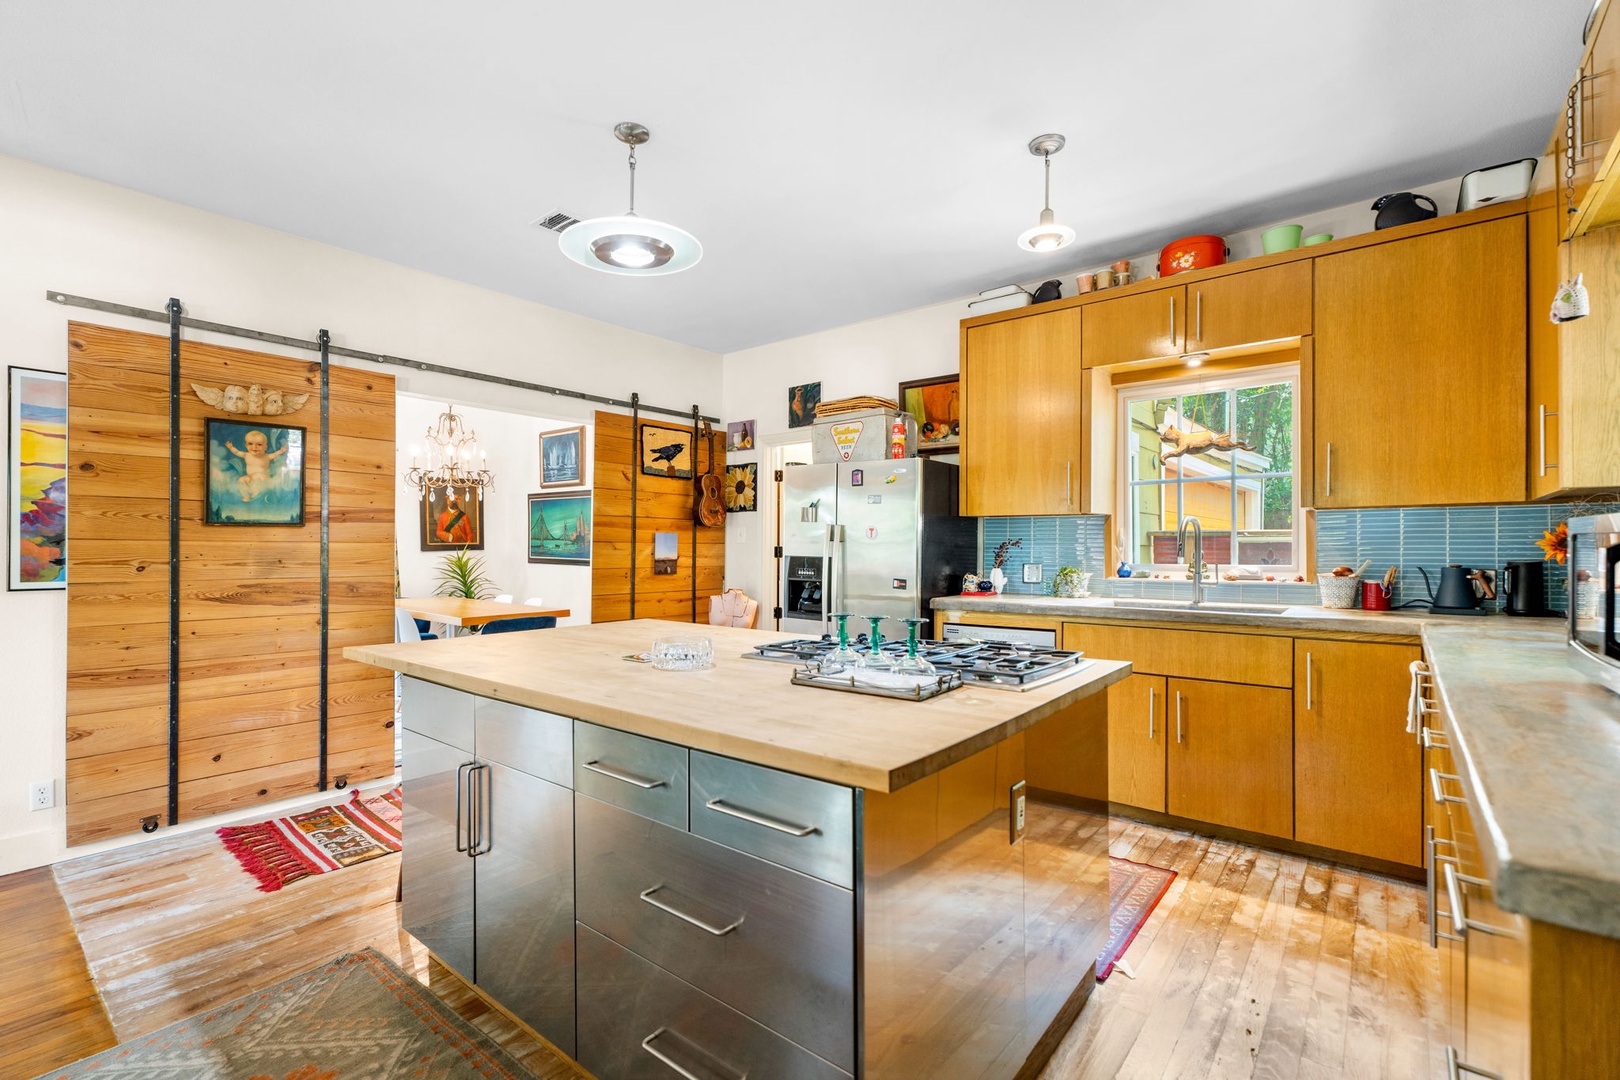 The large, colorful kitchen offers ample space & all the comforts of home